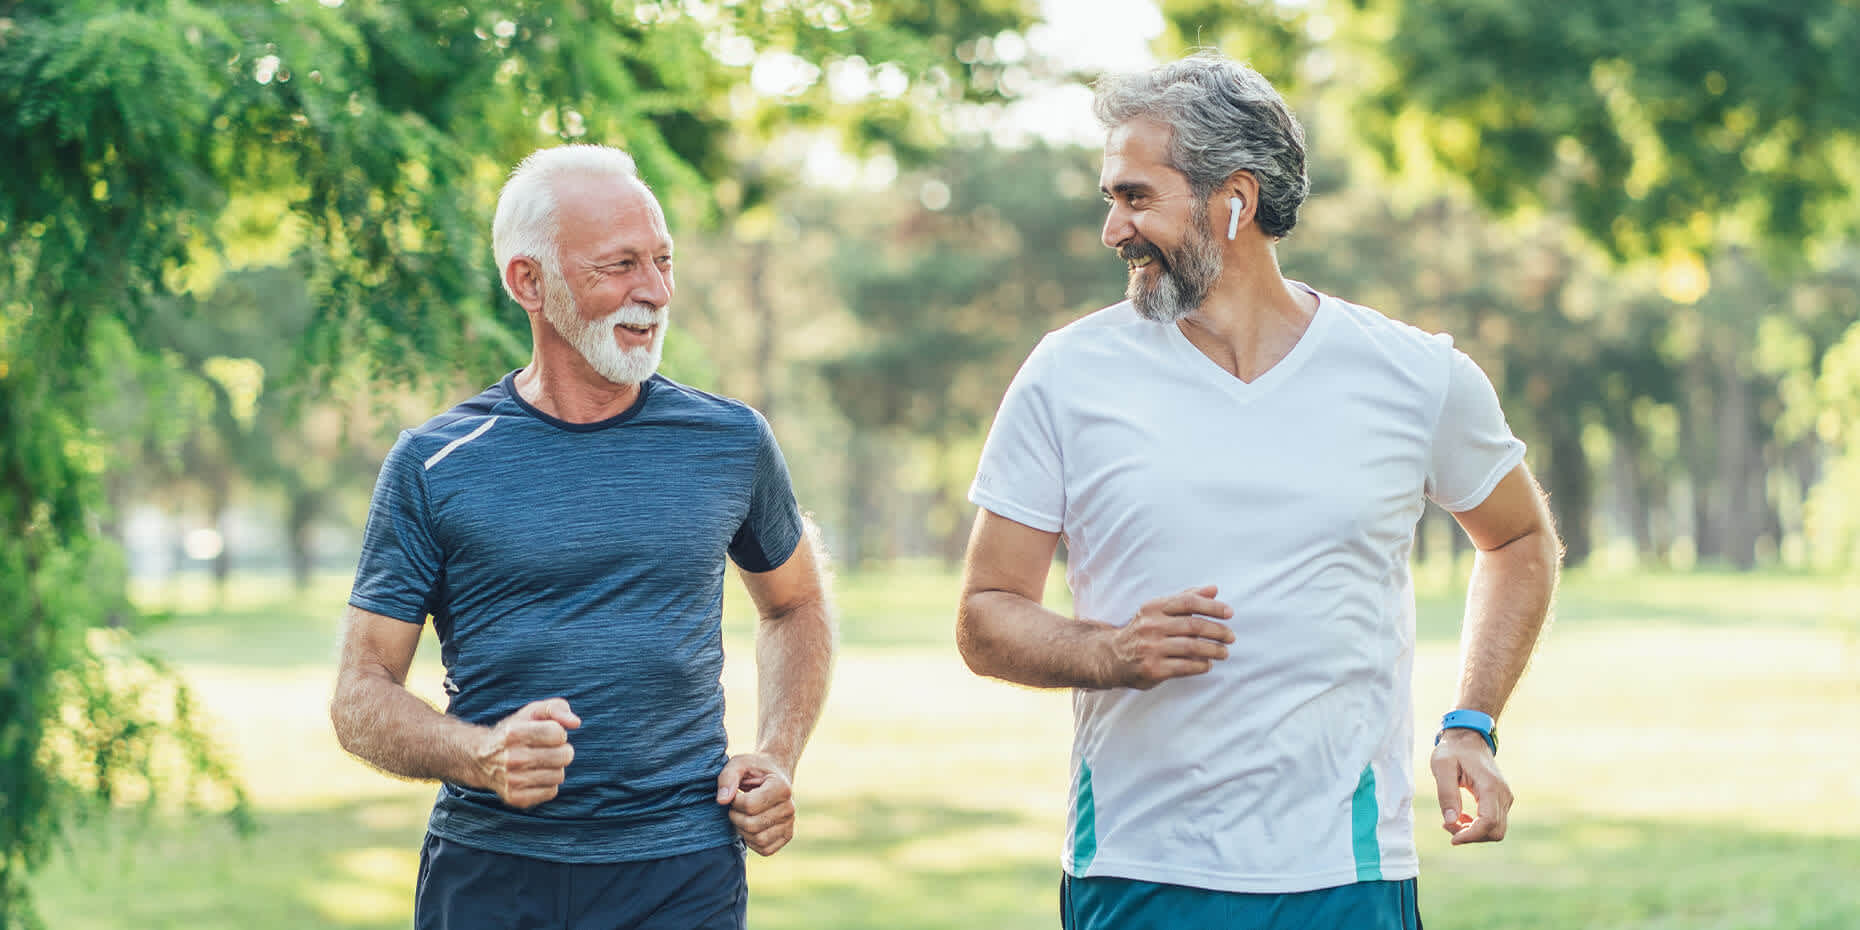 Two men smiling while jogging and discussing the effect of exercise on blood sugar